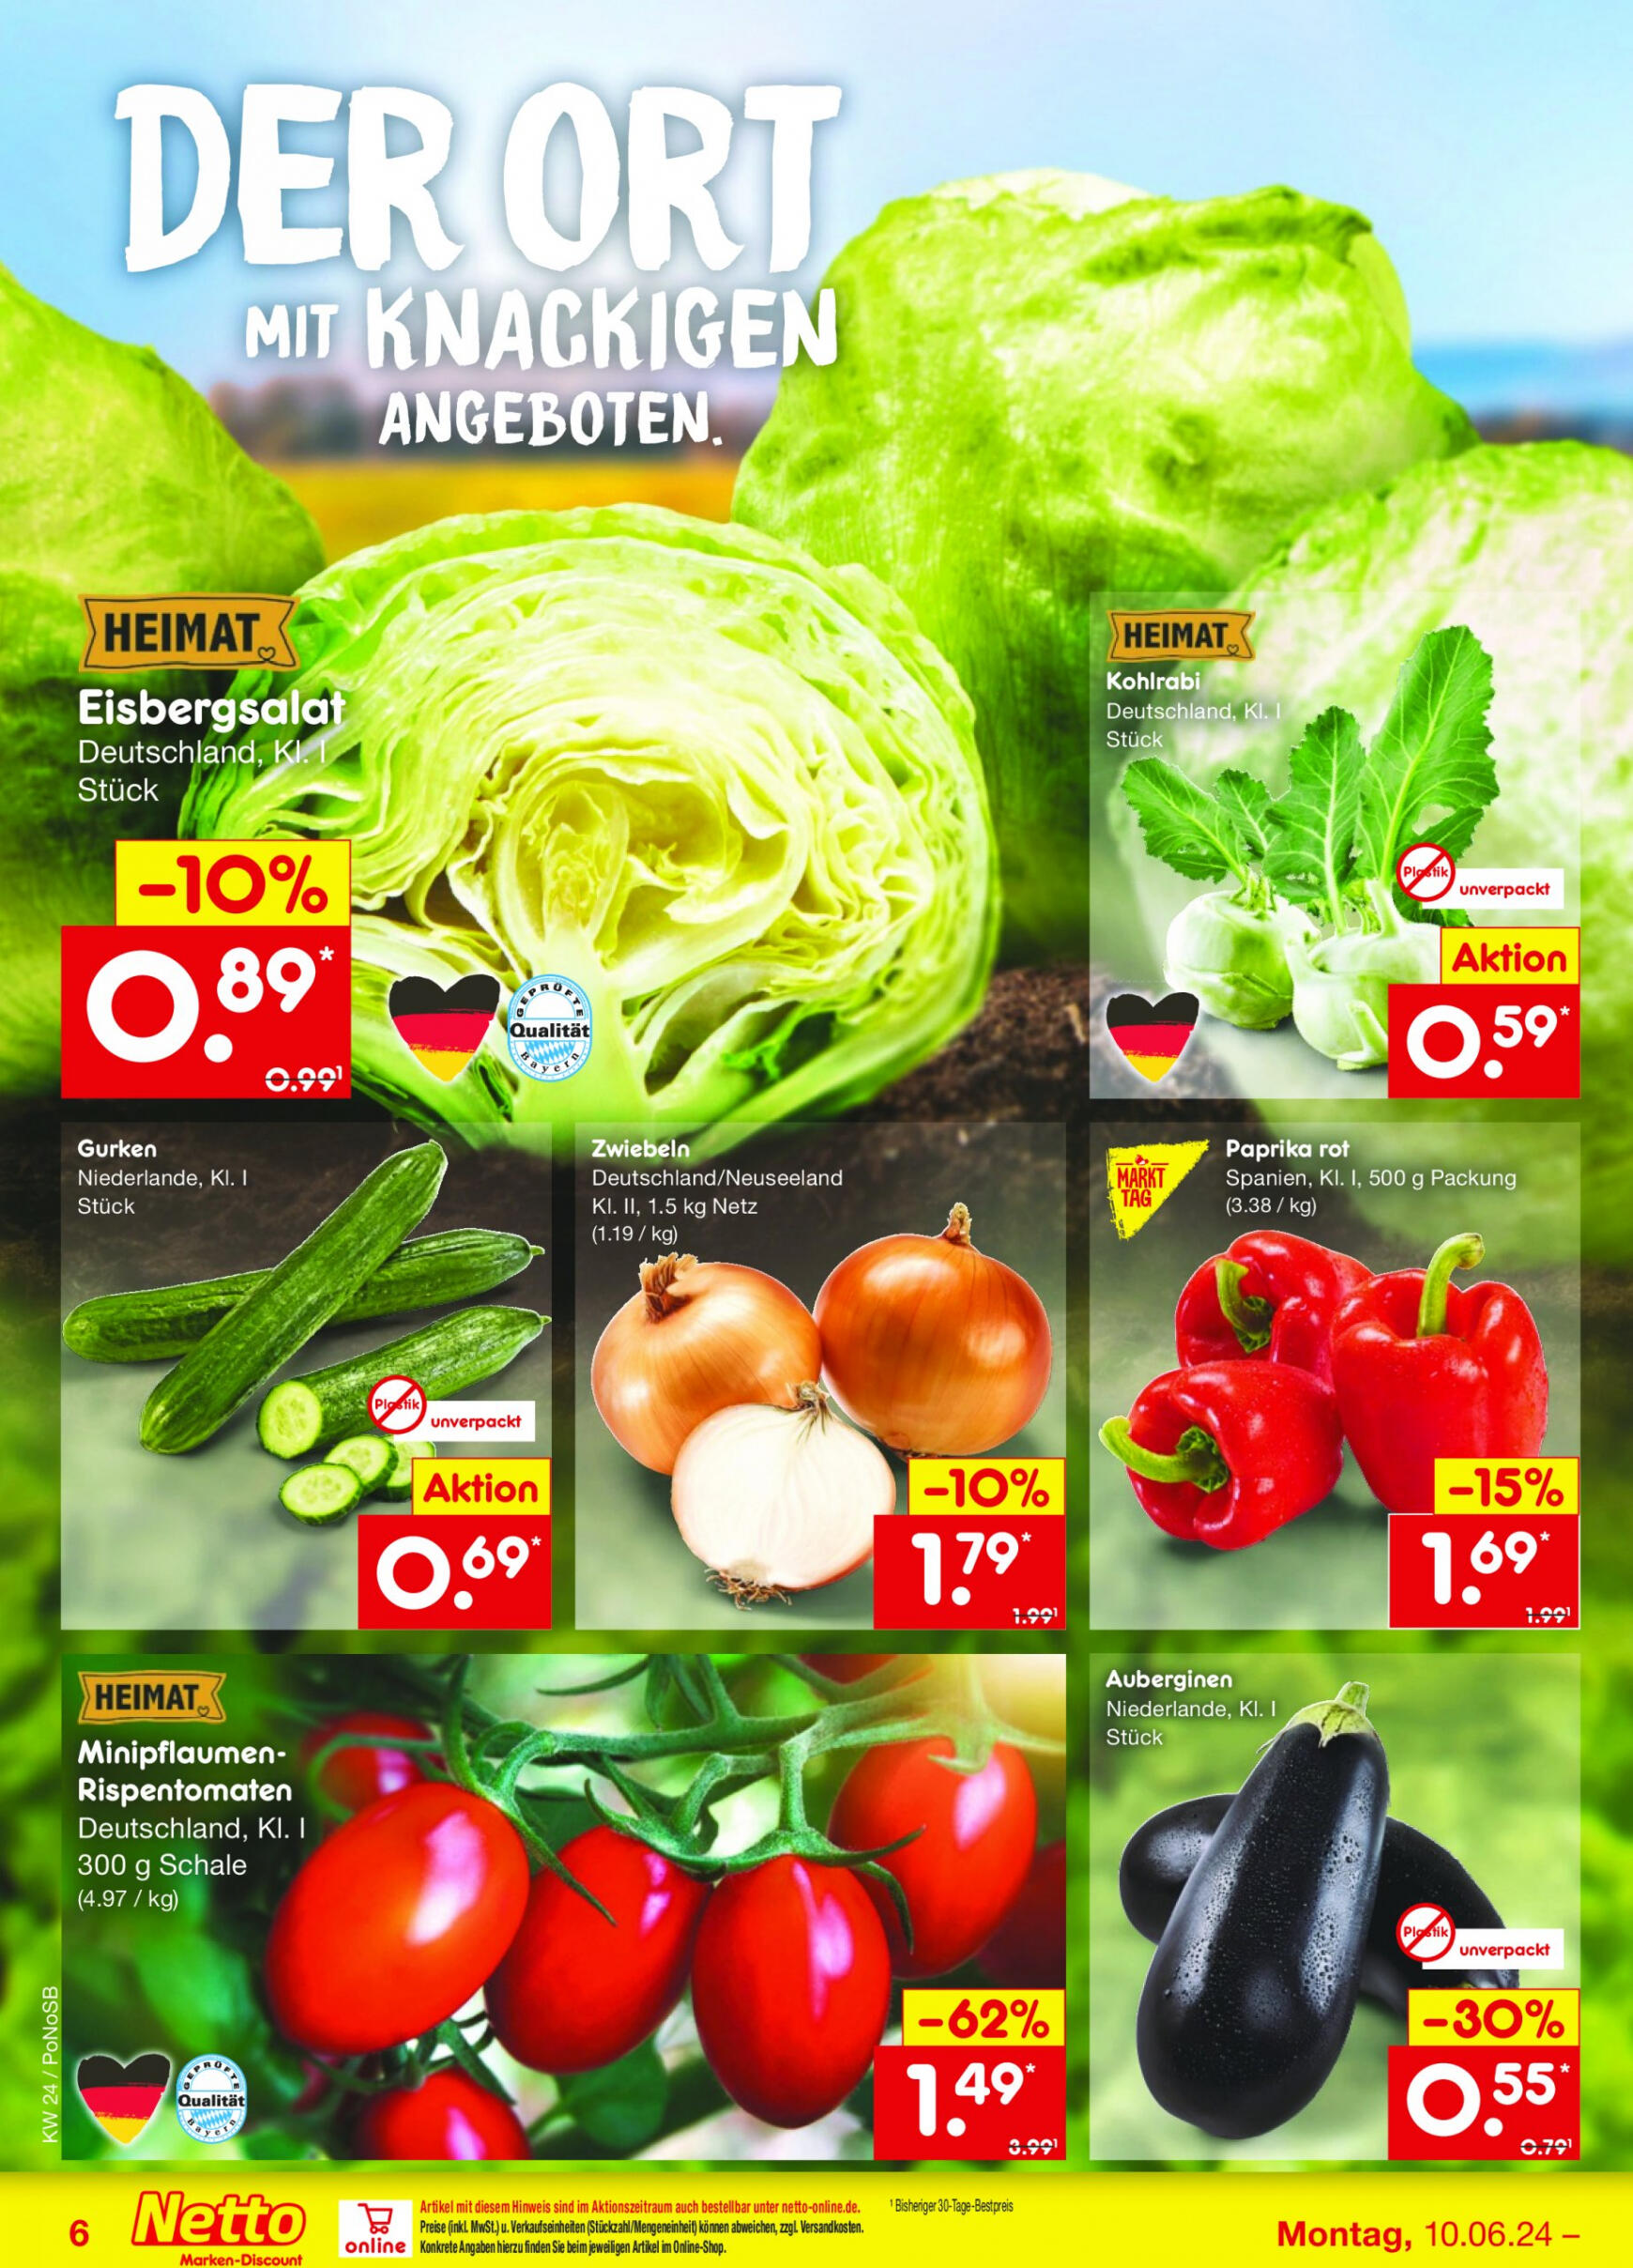 netto - Flyer Netto aktuell 10.06. - 15.06. - page: 8